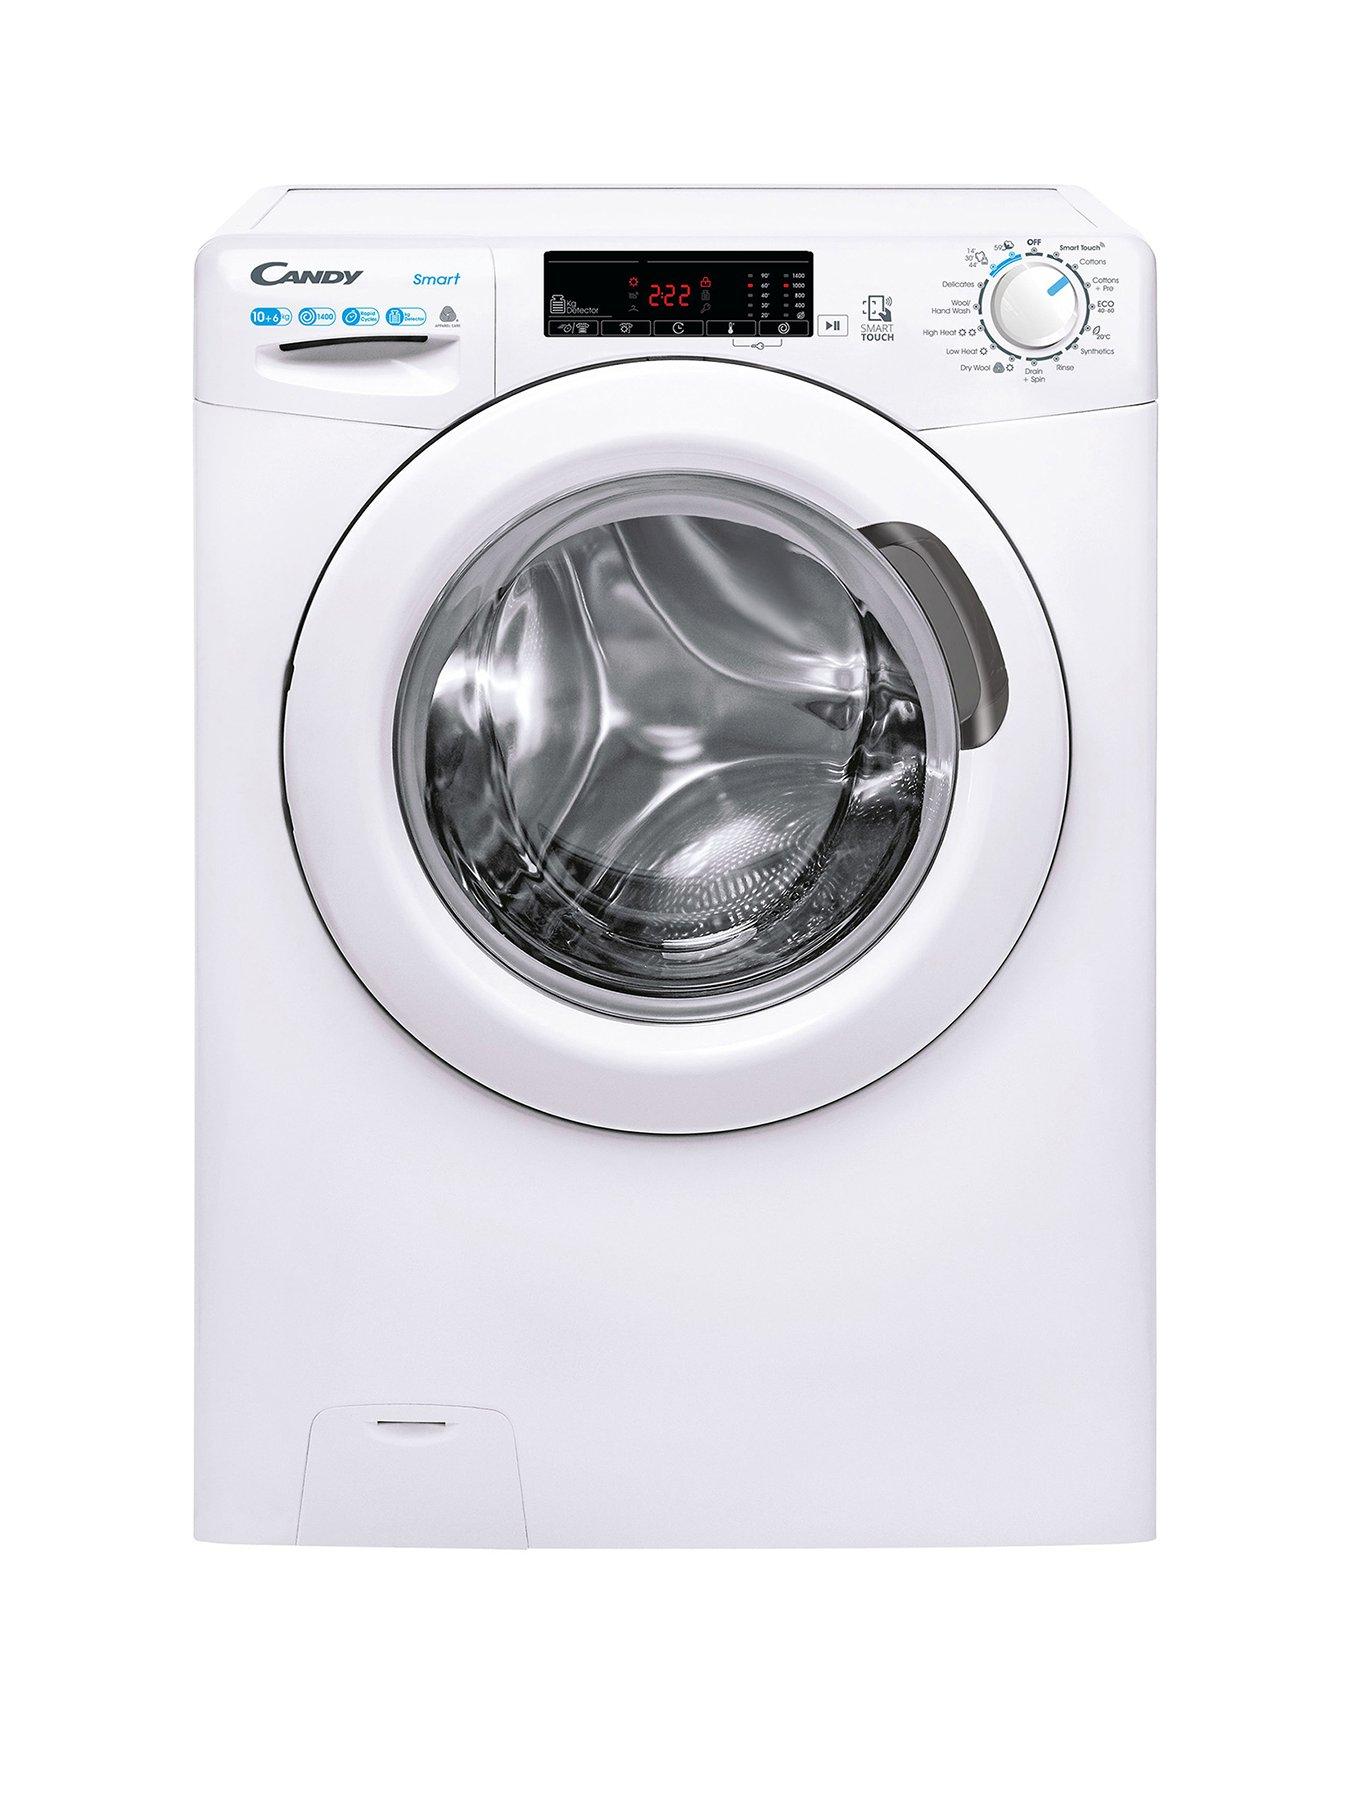 Candy Smart Csw 4106Te/1-80 10+6Kg Wash/Dry 1400 Rpm Freestanding Washer Dryer - White